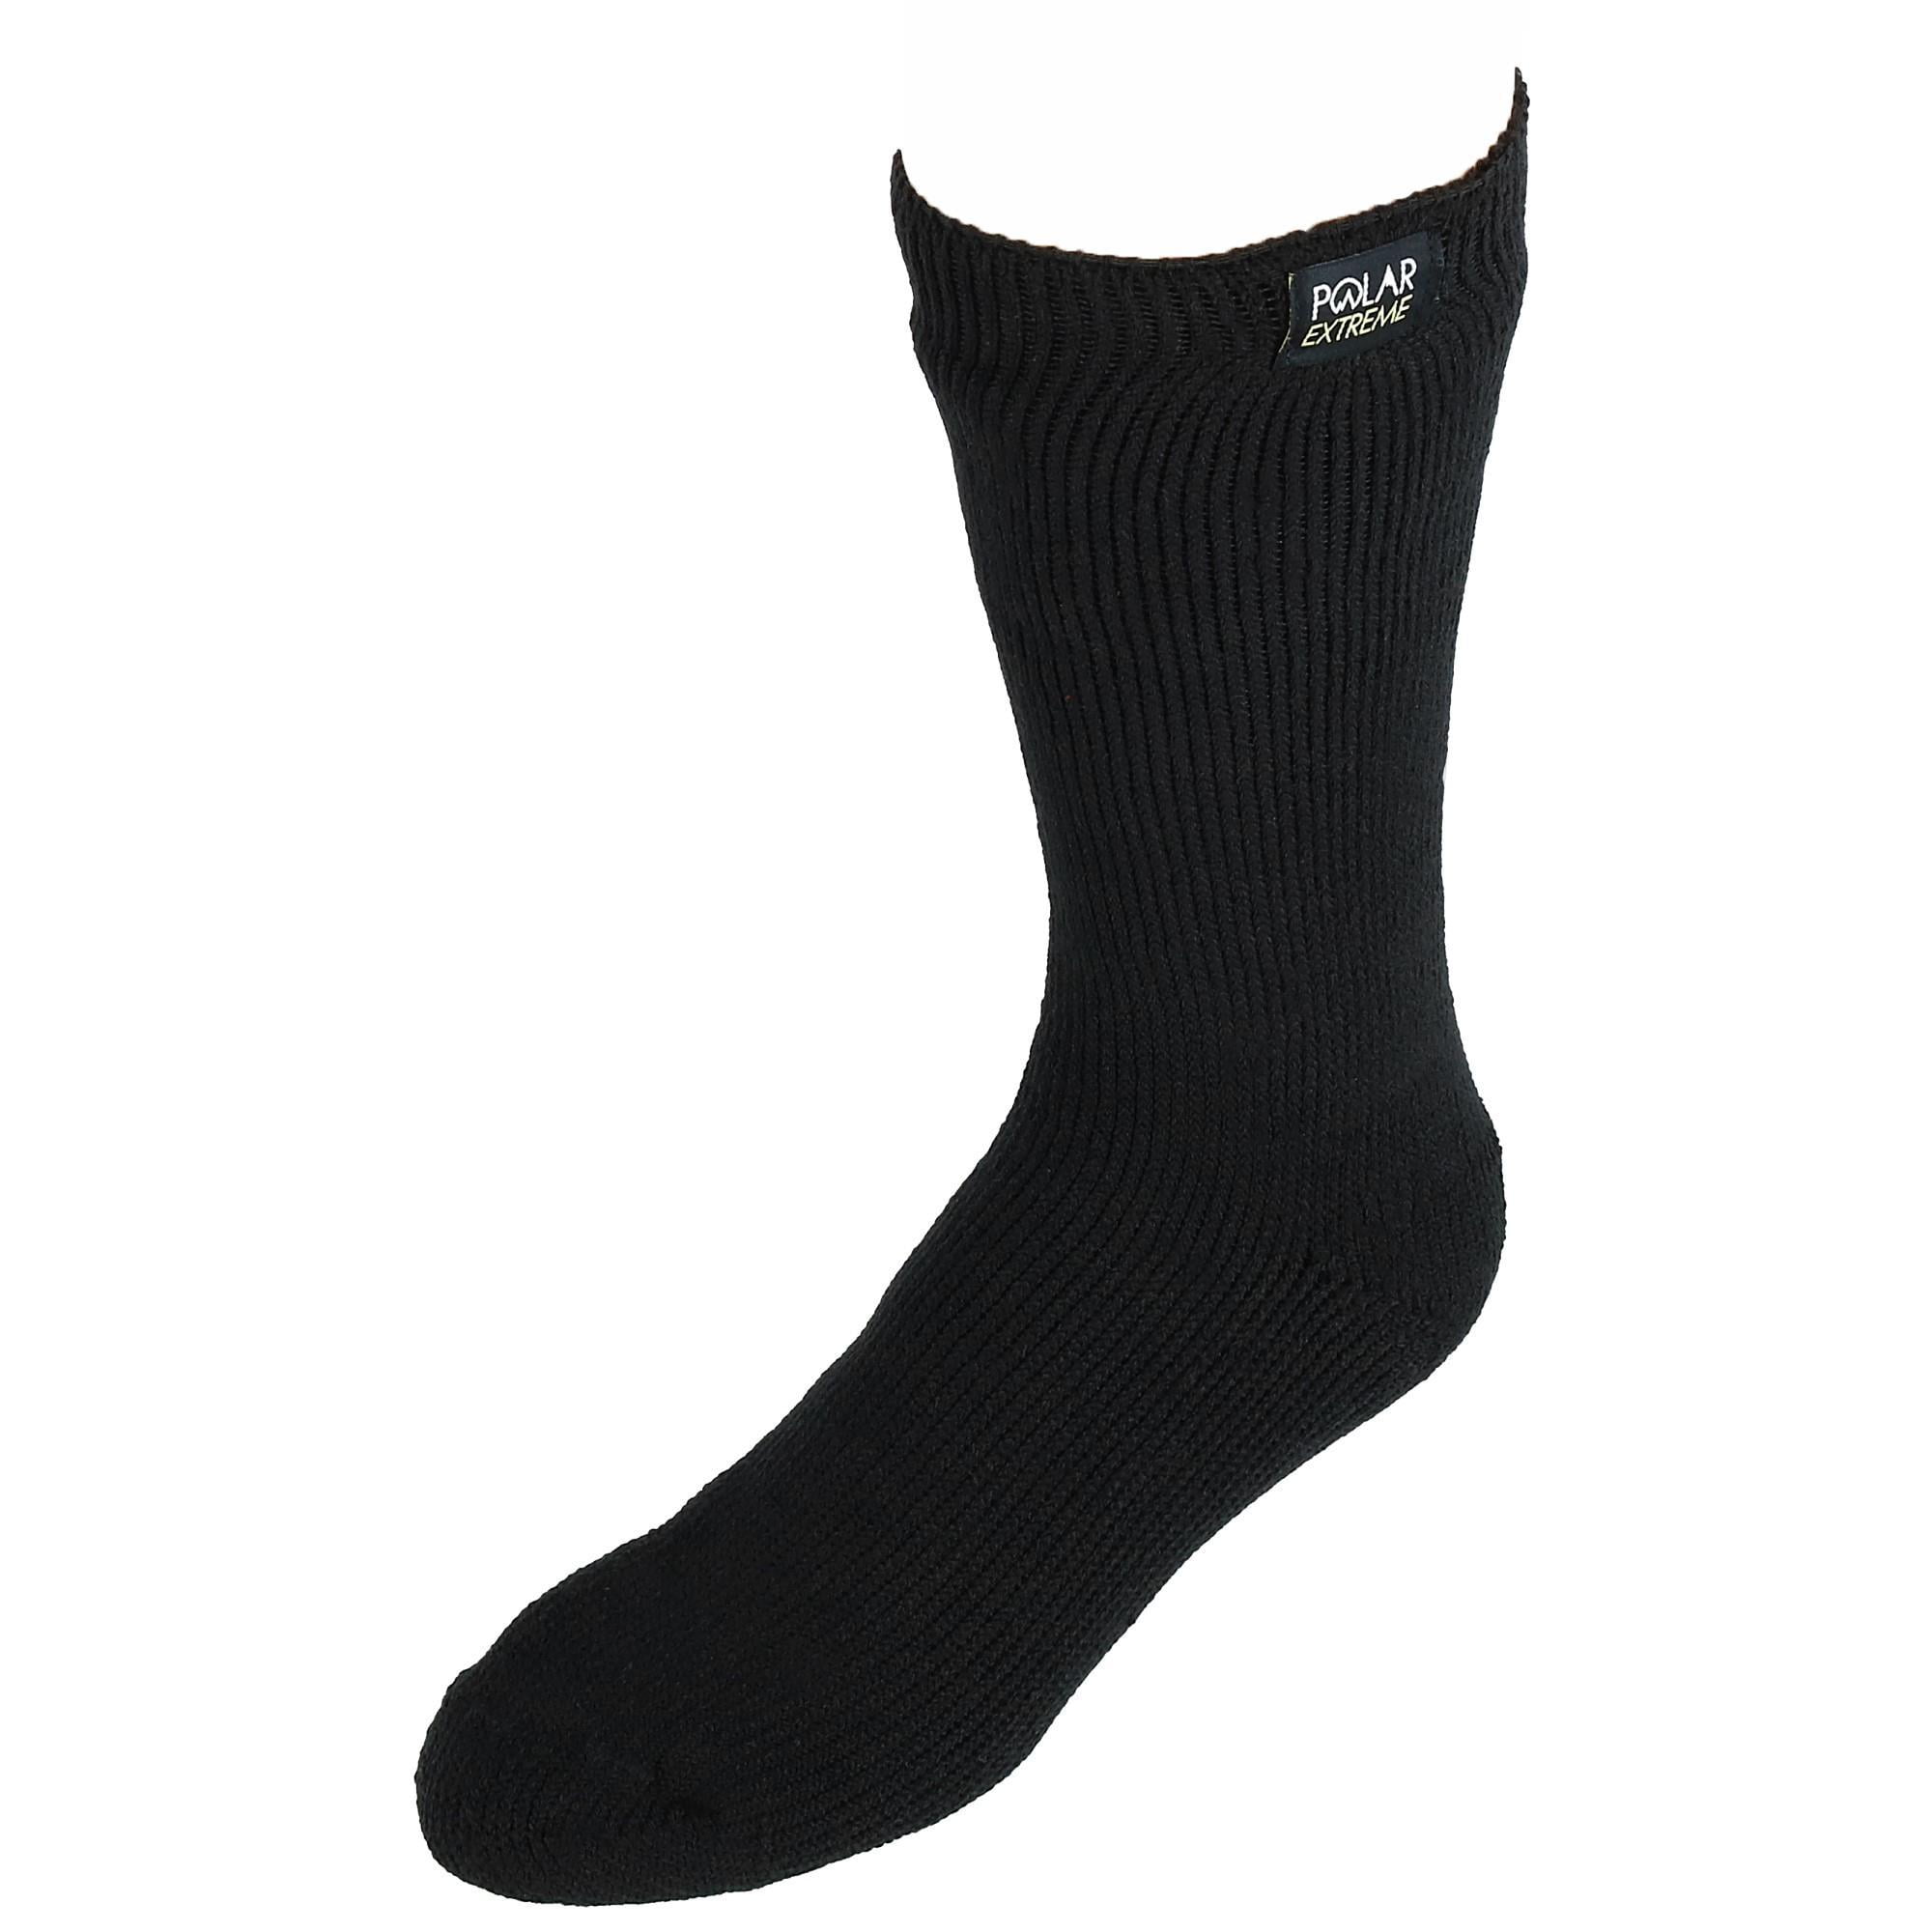 Polar Extreme Men's Thermal Socks with Insulated Fleece Lining (3 Pair ...